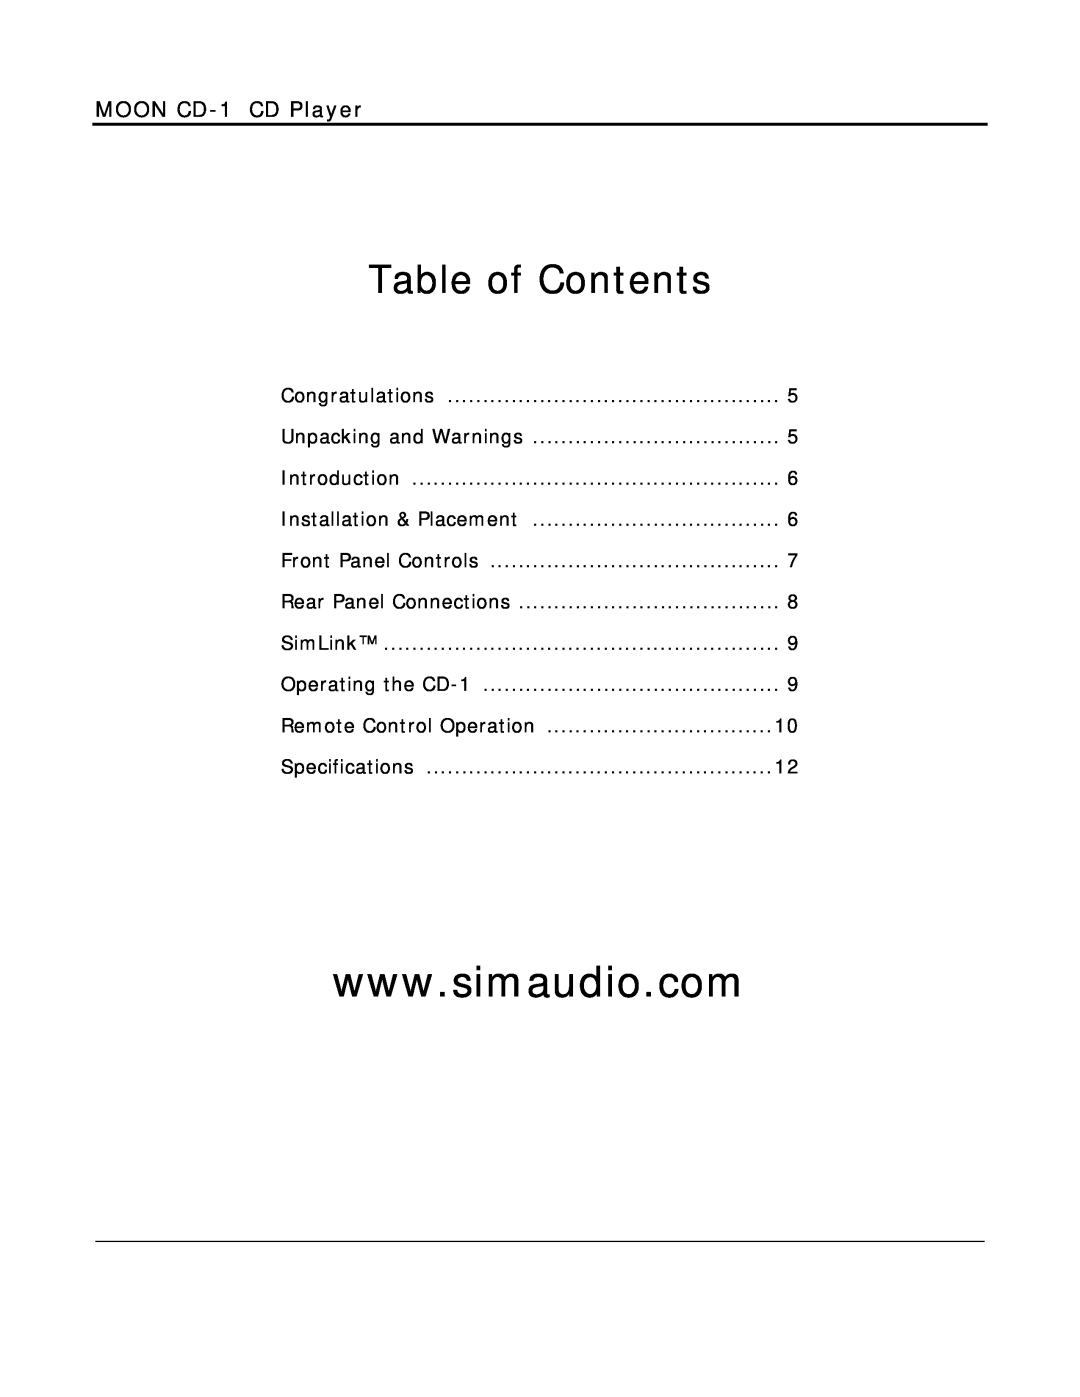 Simaudio owner manual Table of Contents, MOON CD-1CD Player 